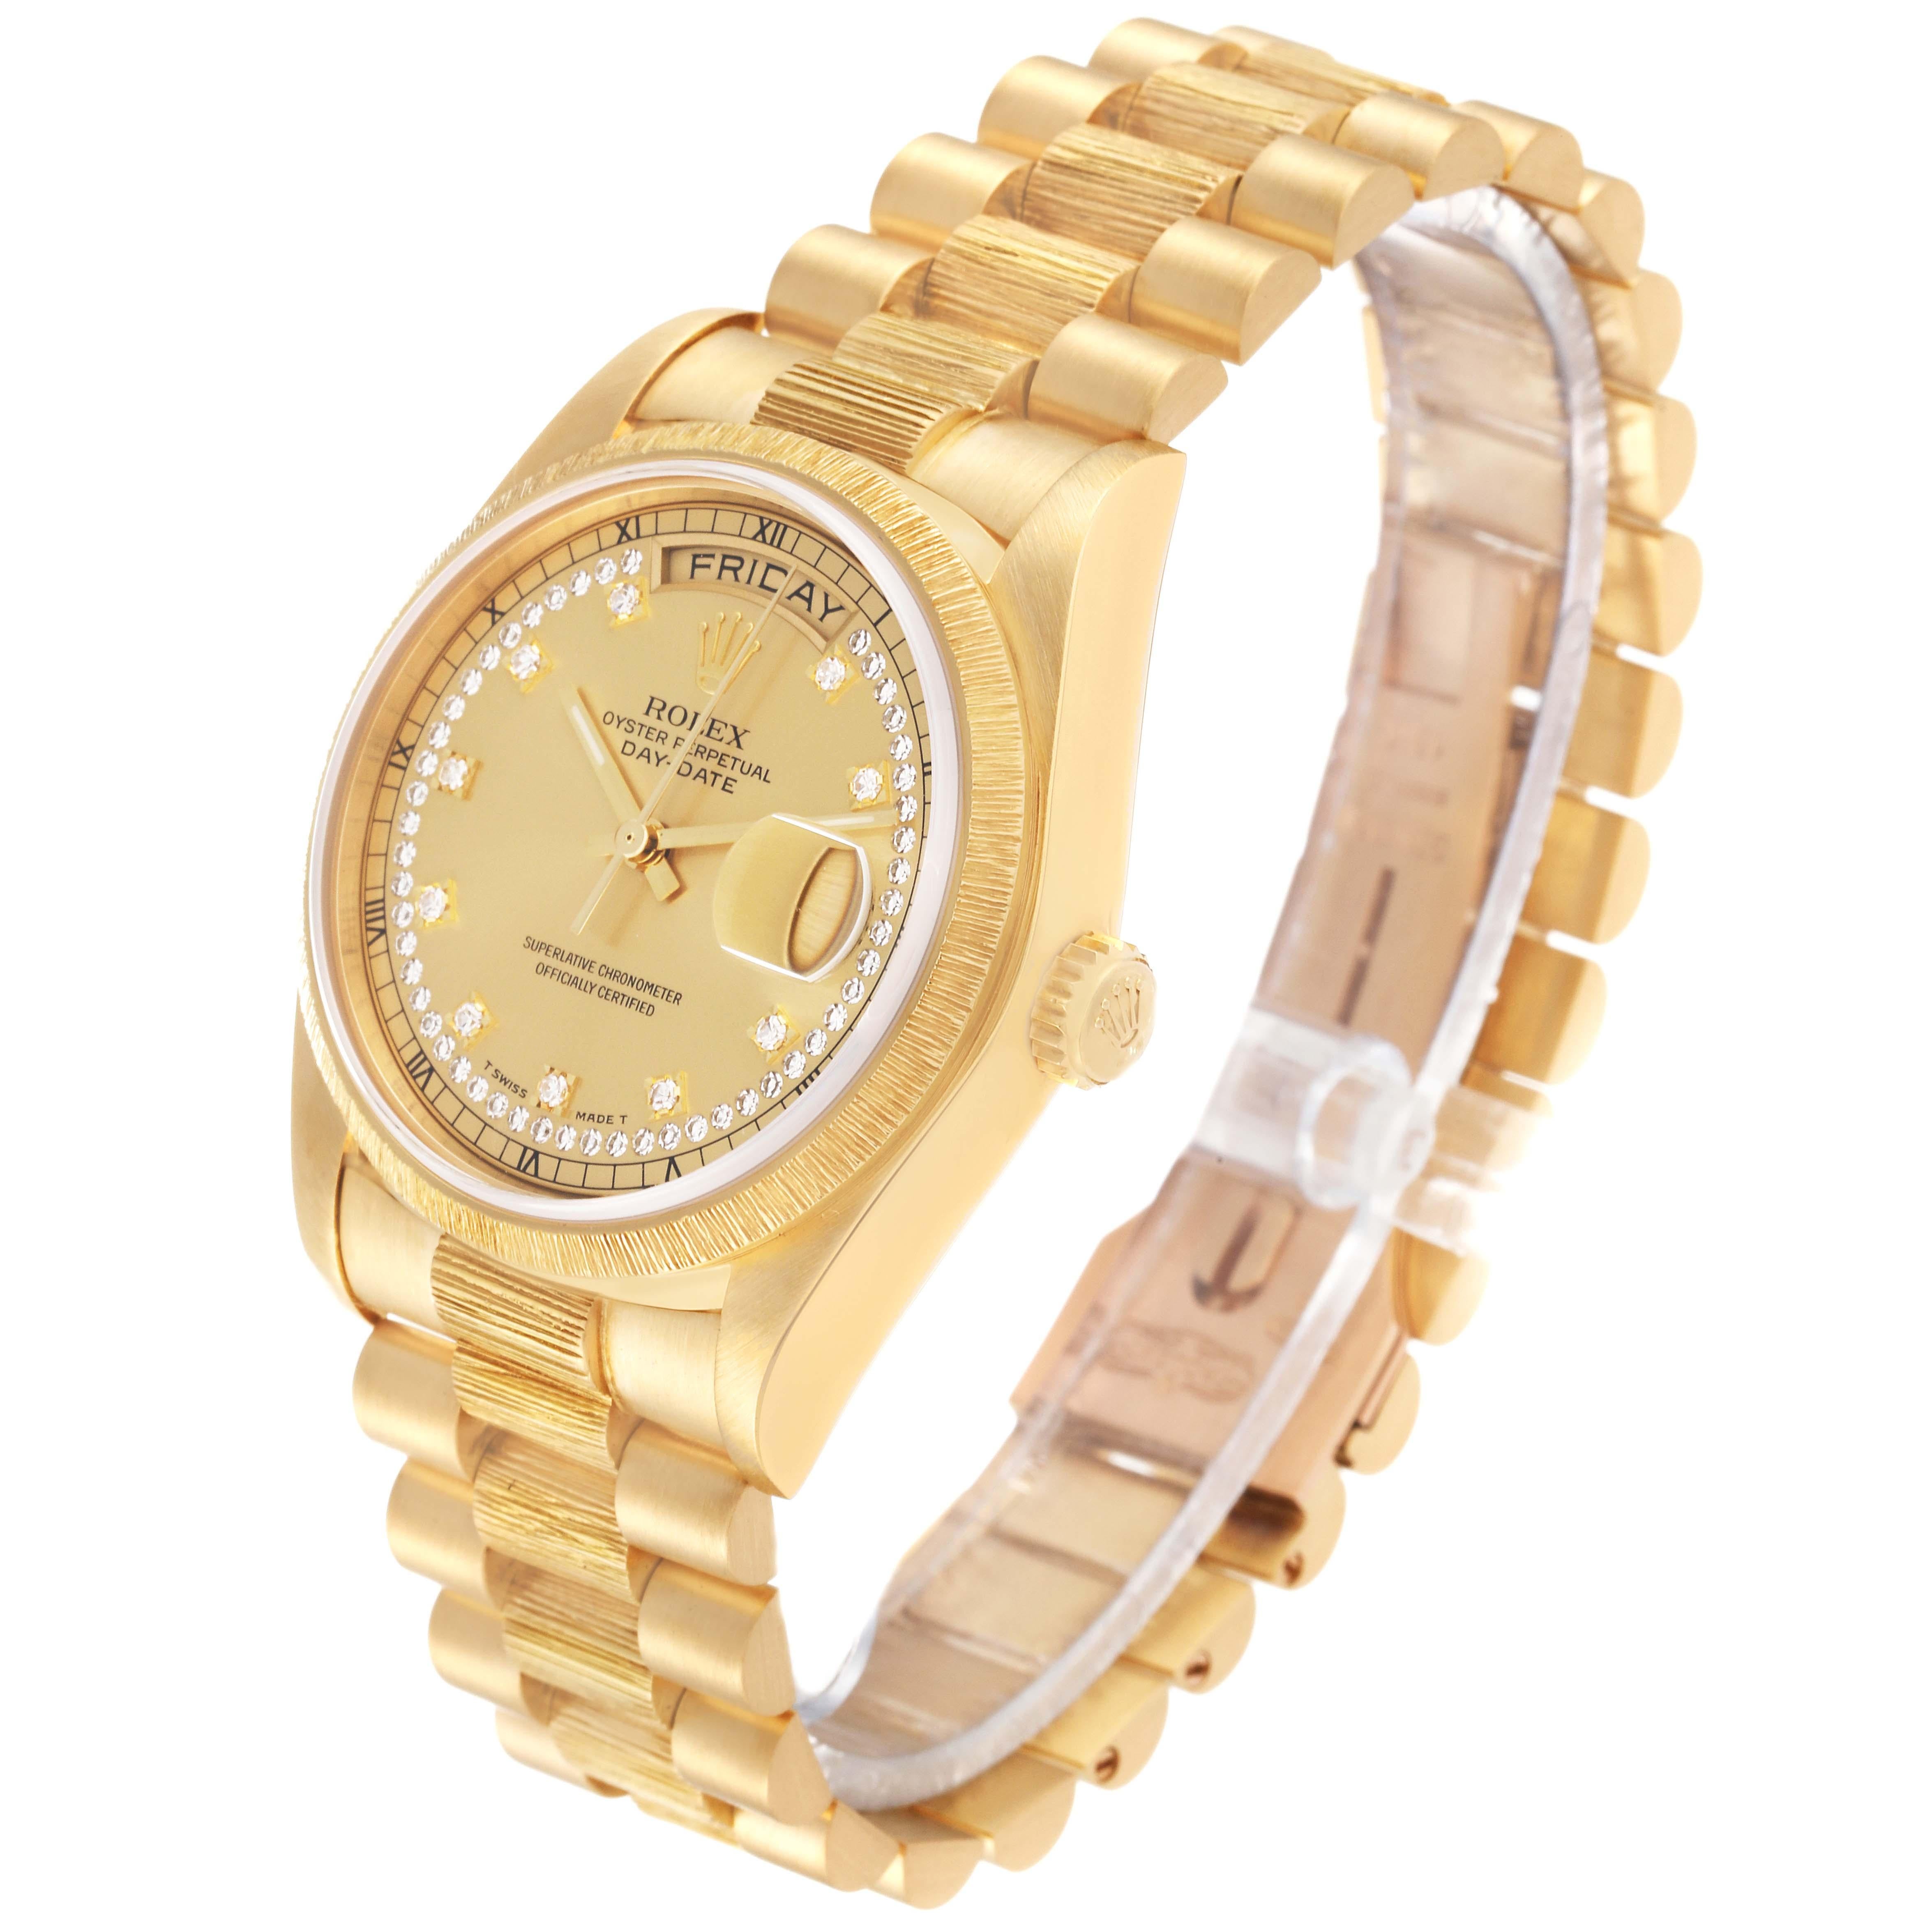 Rolex President Day-Date Diamond Dial Yellow Gold Bark Finish Mens Watch 18078 For Sale 4